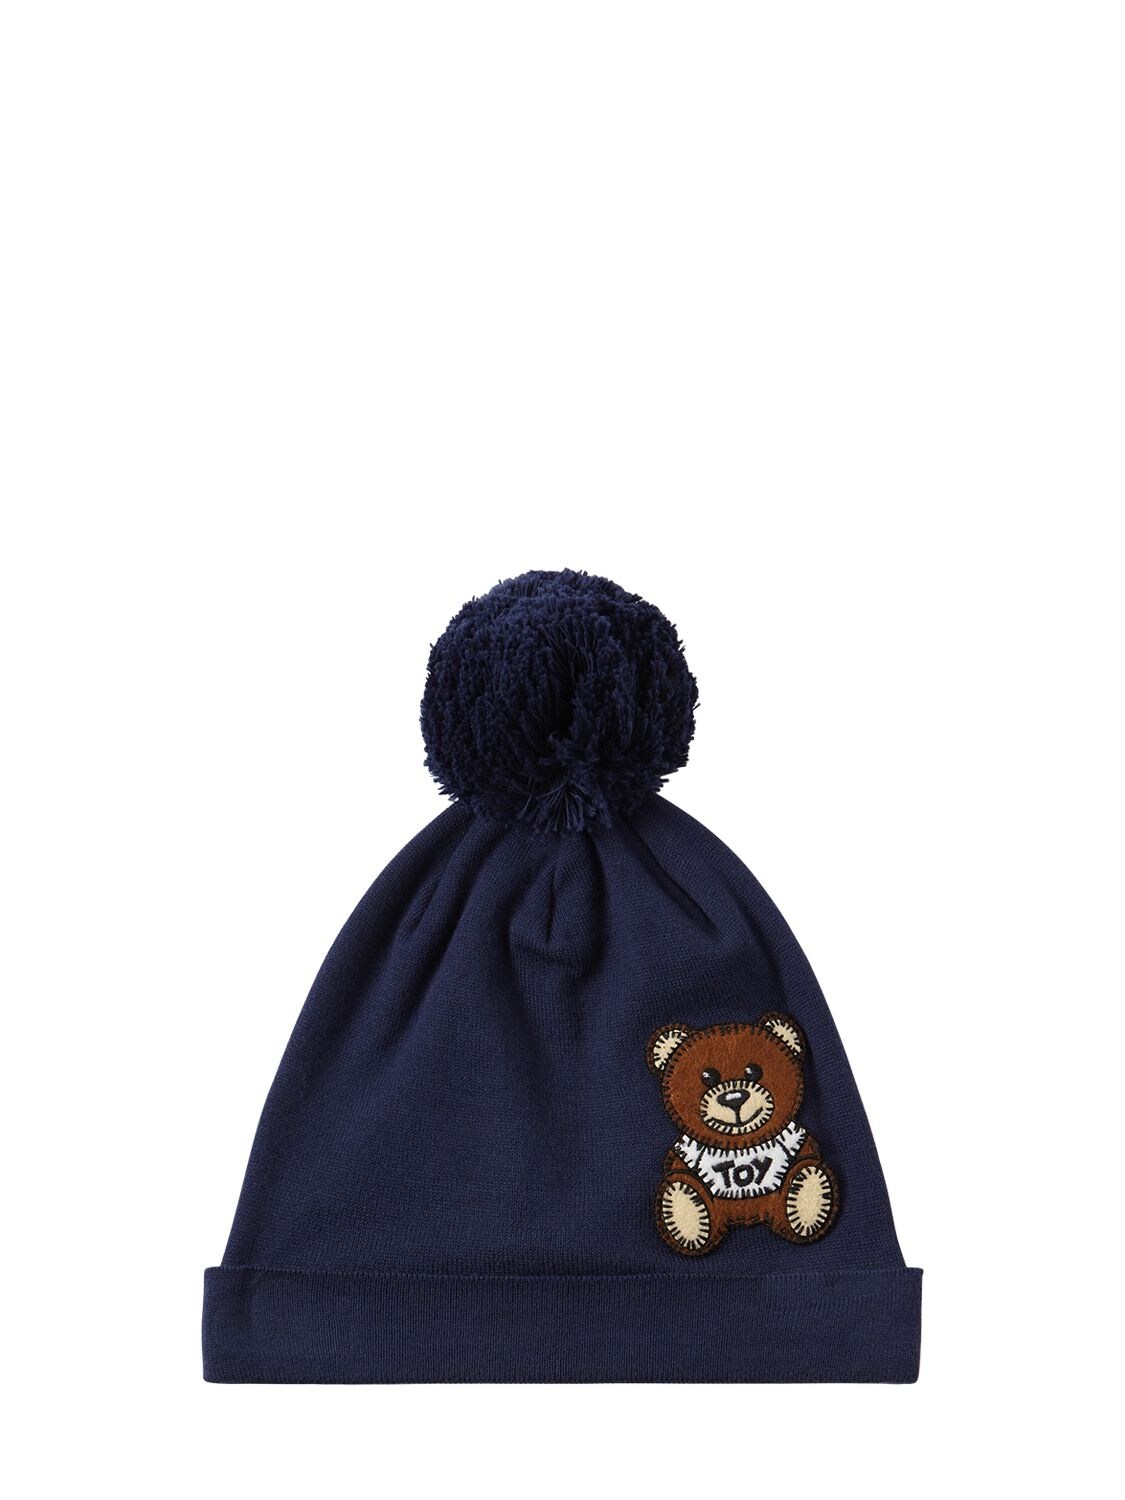 Moschino Babies' Cotton Beanie Hat W/ Toy Patch In Navy